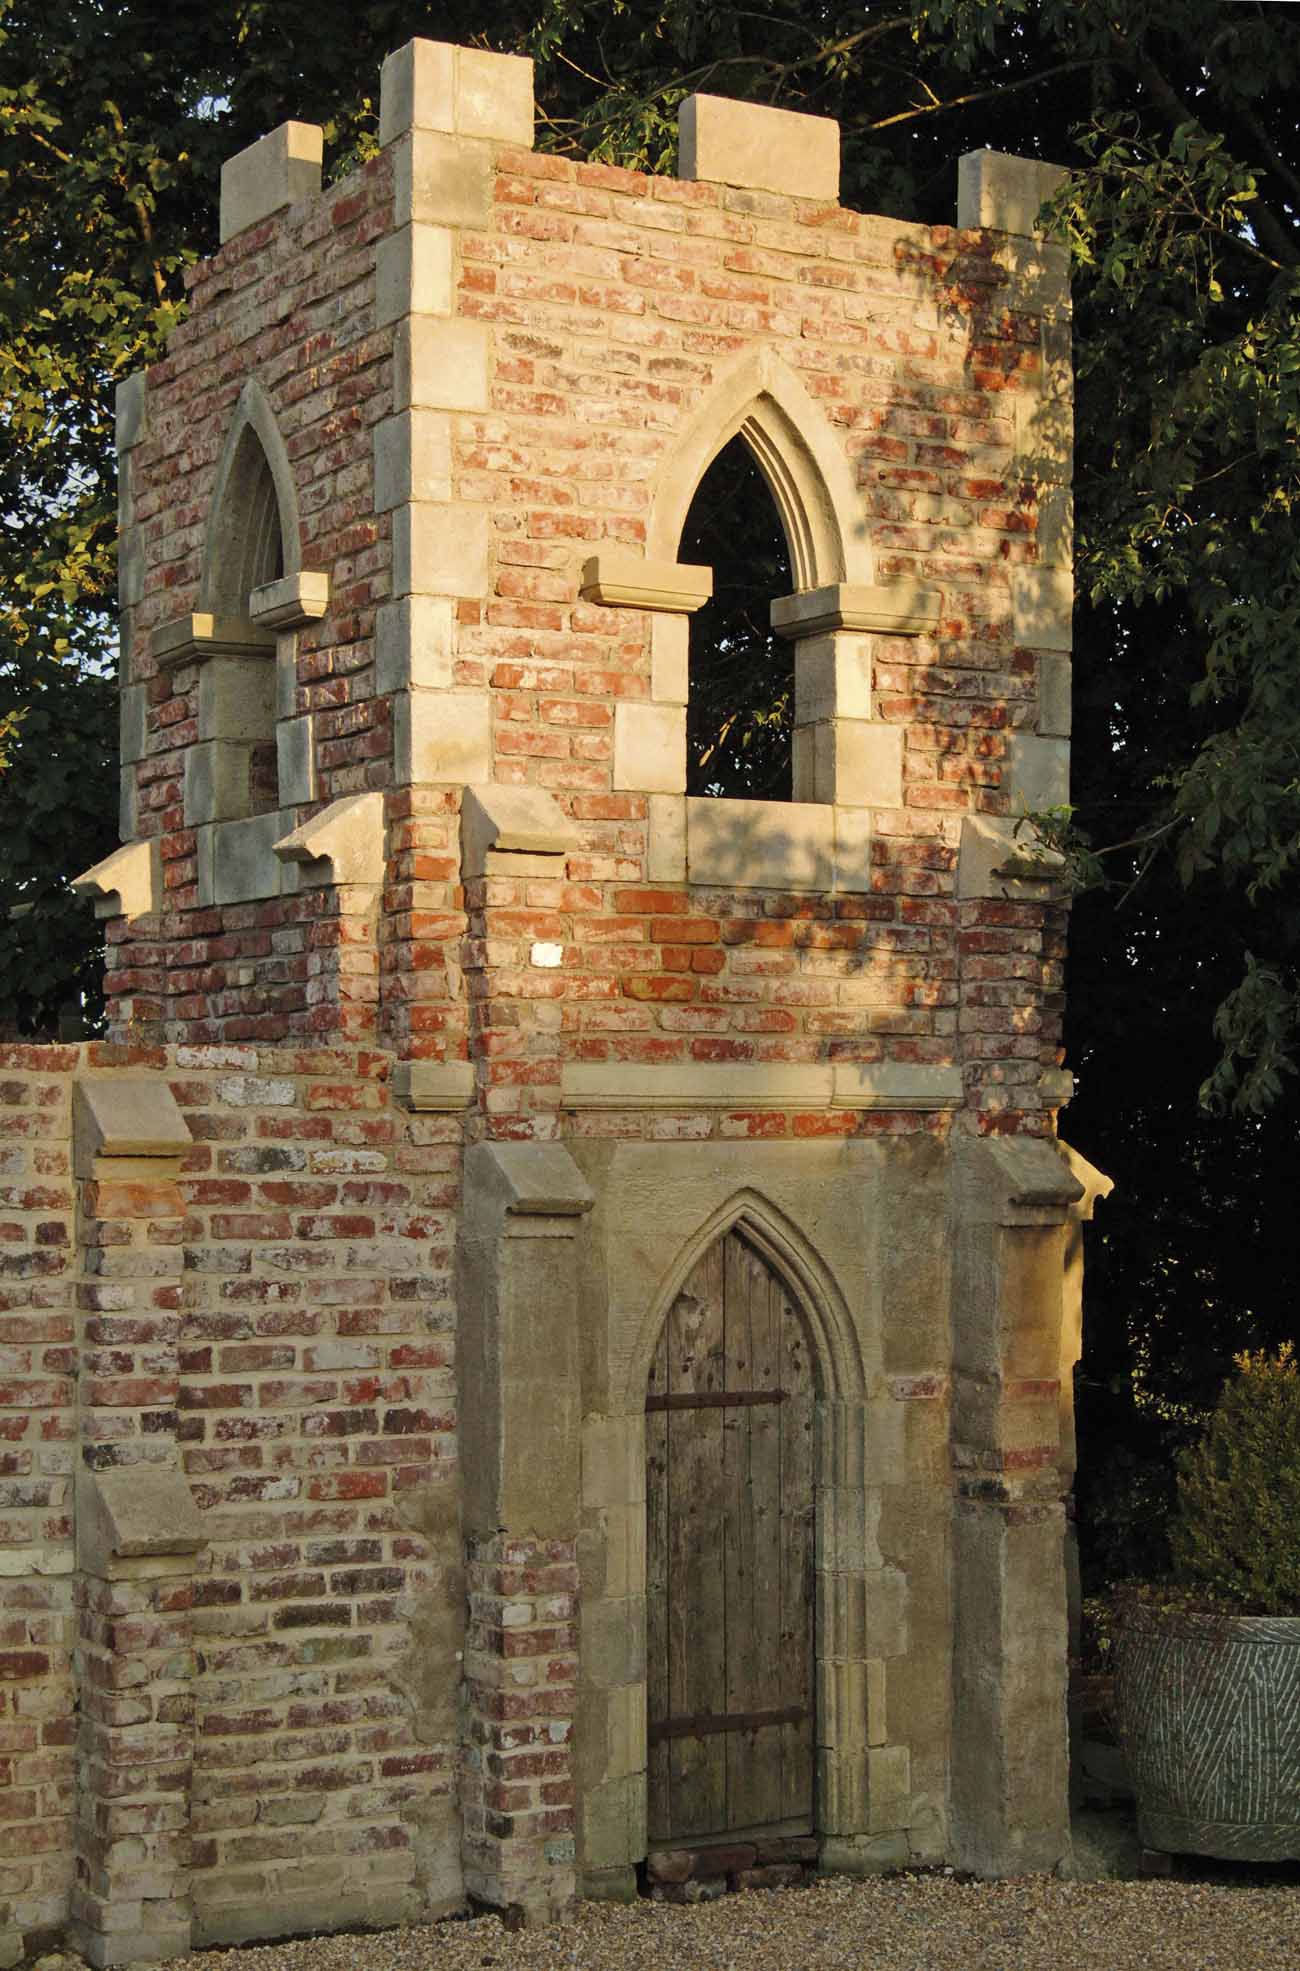 The Ruined Bell Tower